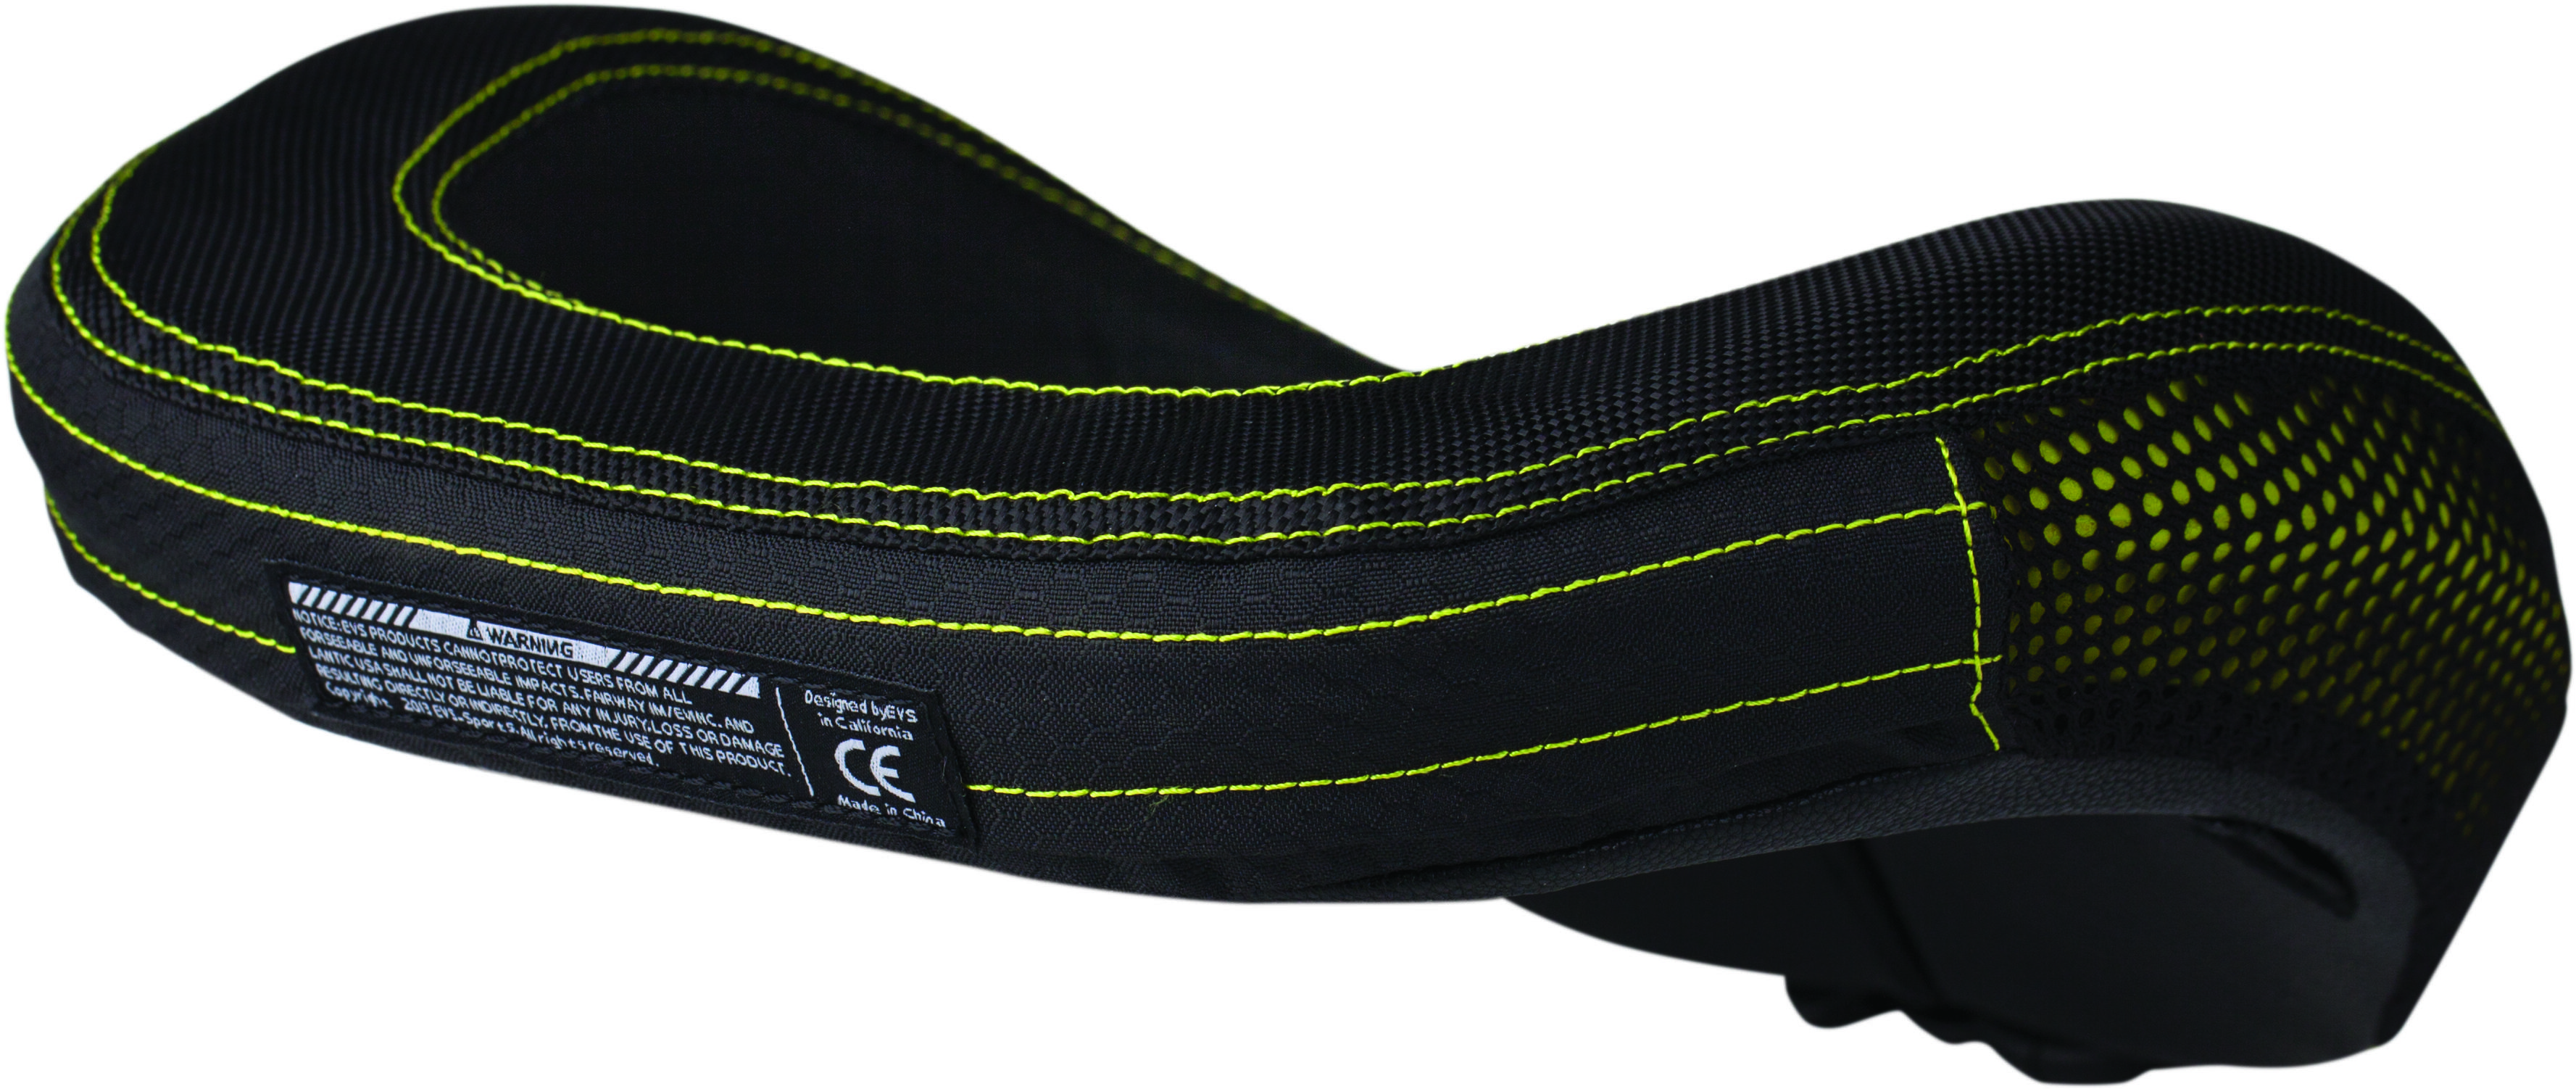 R2 Race Collar Black Adult - Click Image to Close